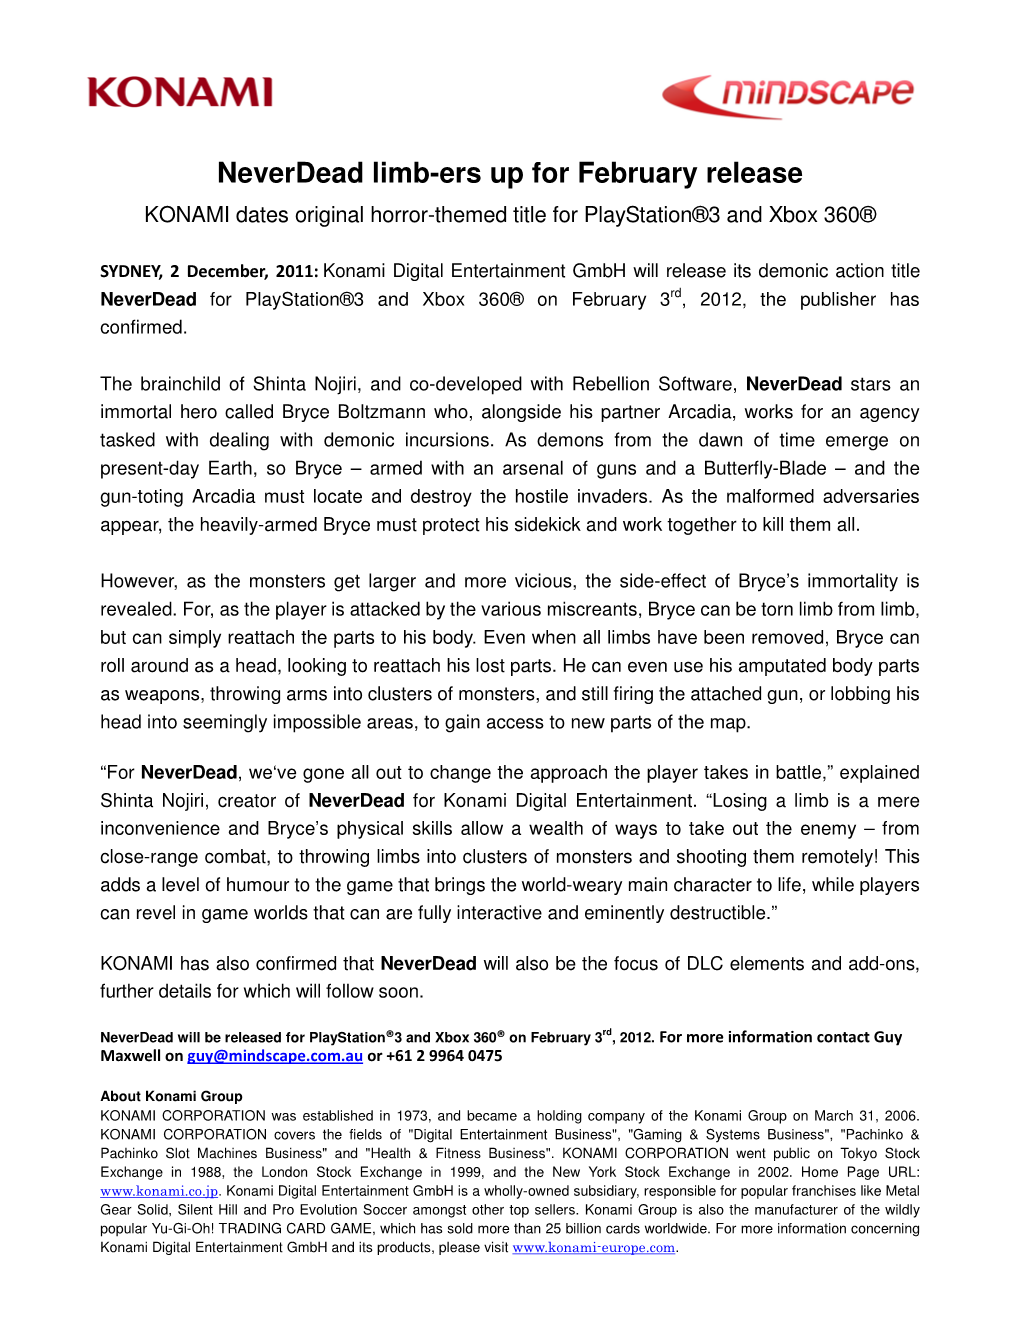 Neverdead Limb-Ers up for February Release KONAMI Dates Original Horror-Themed Title for Playstation®3 and Xbox 360®